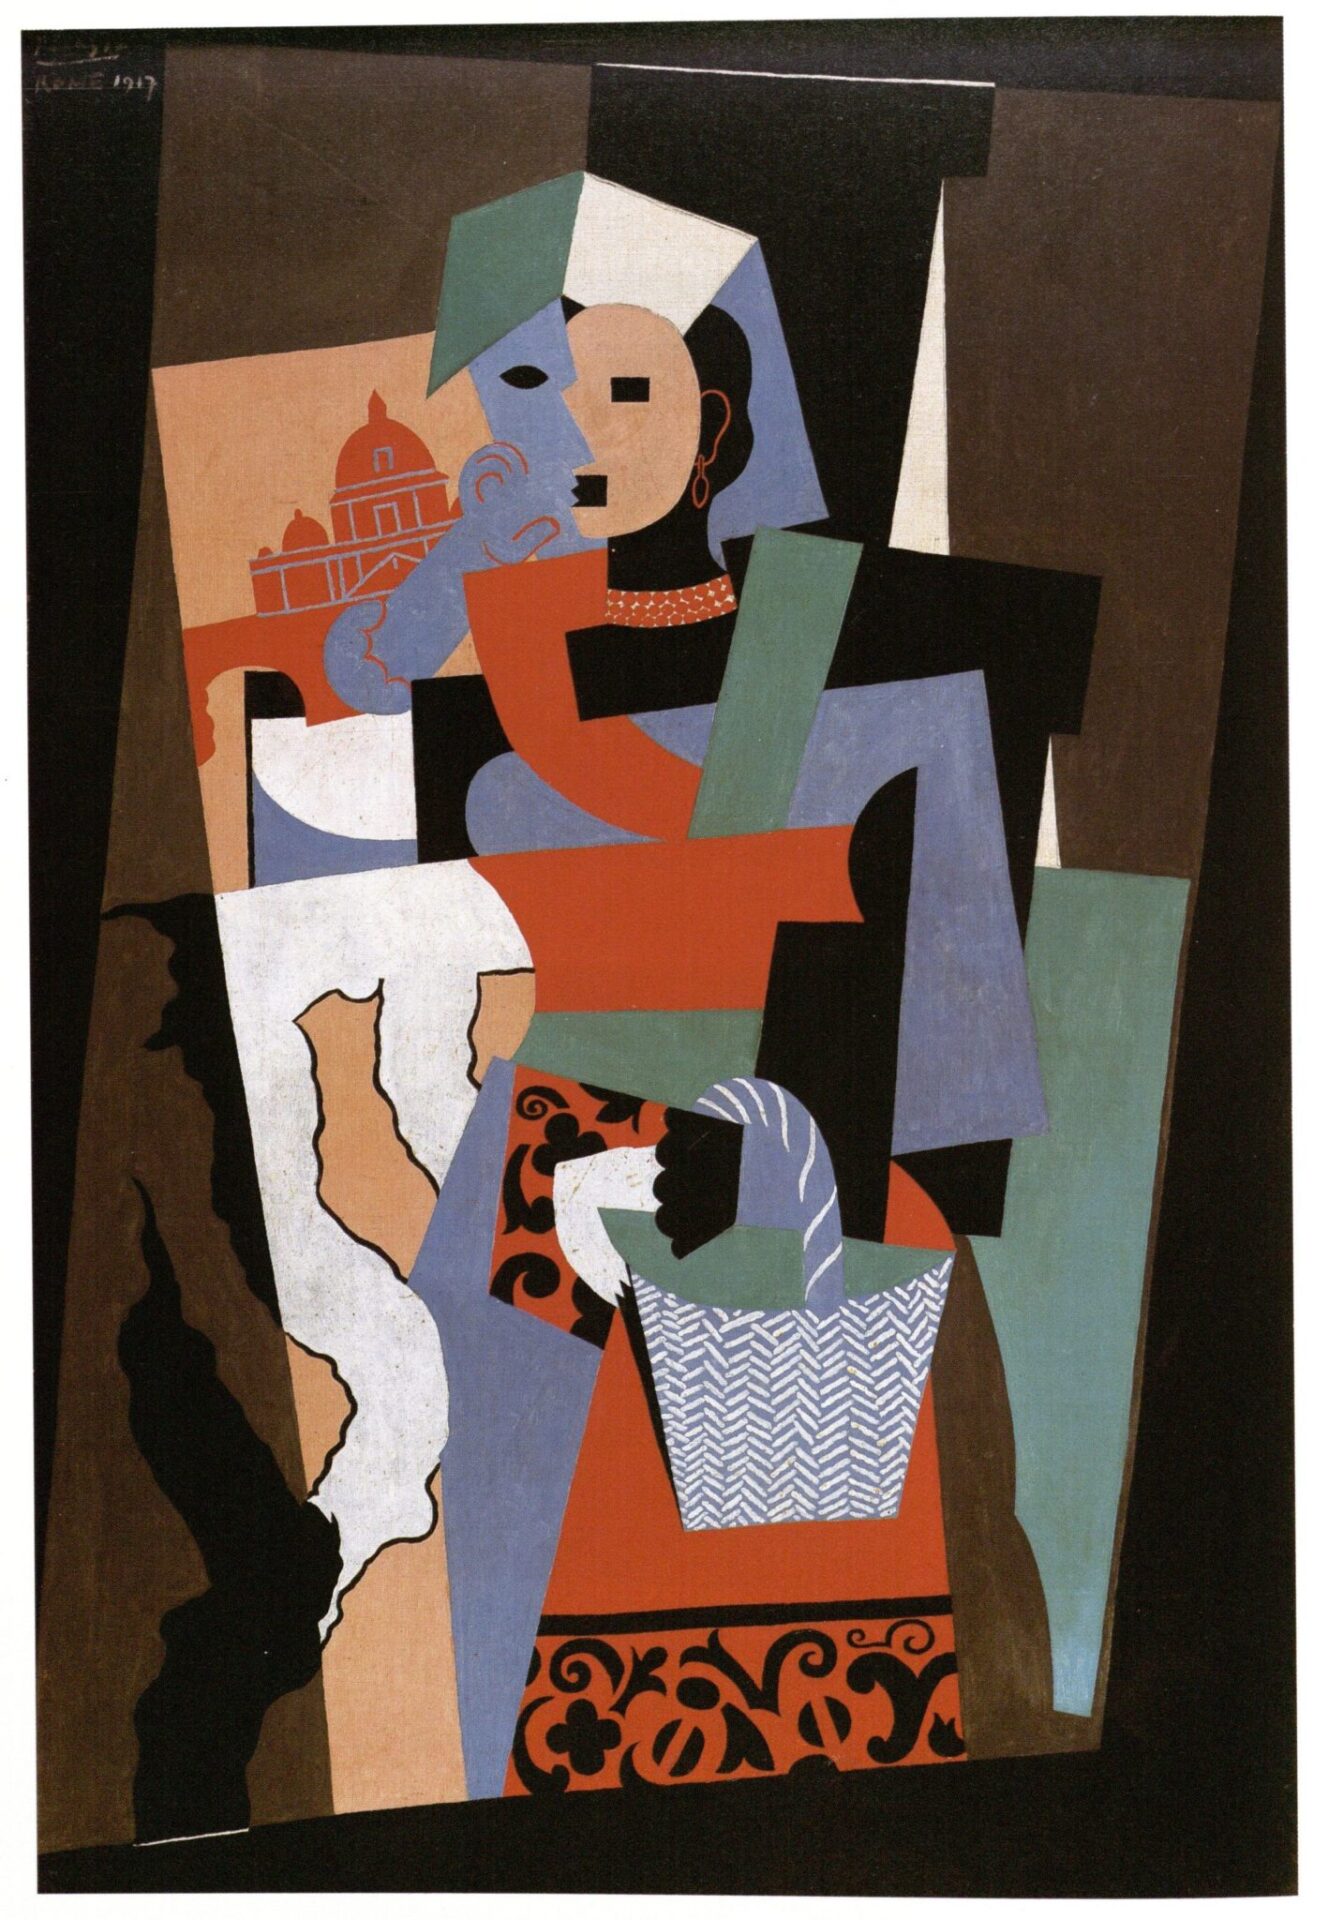 Fig. 5: Pablo Picasso, L'Italienne 1917, oil on canvas, Private collection.